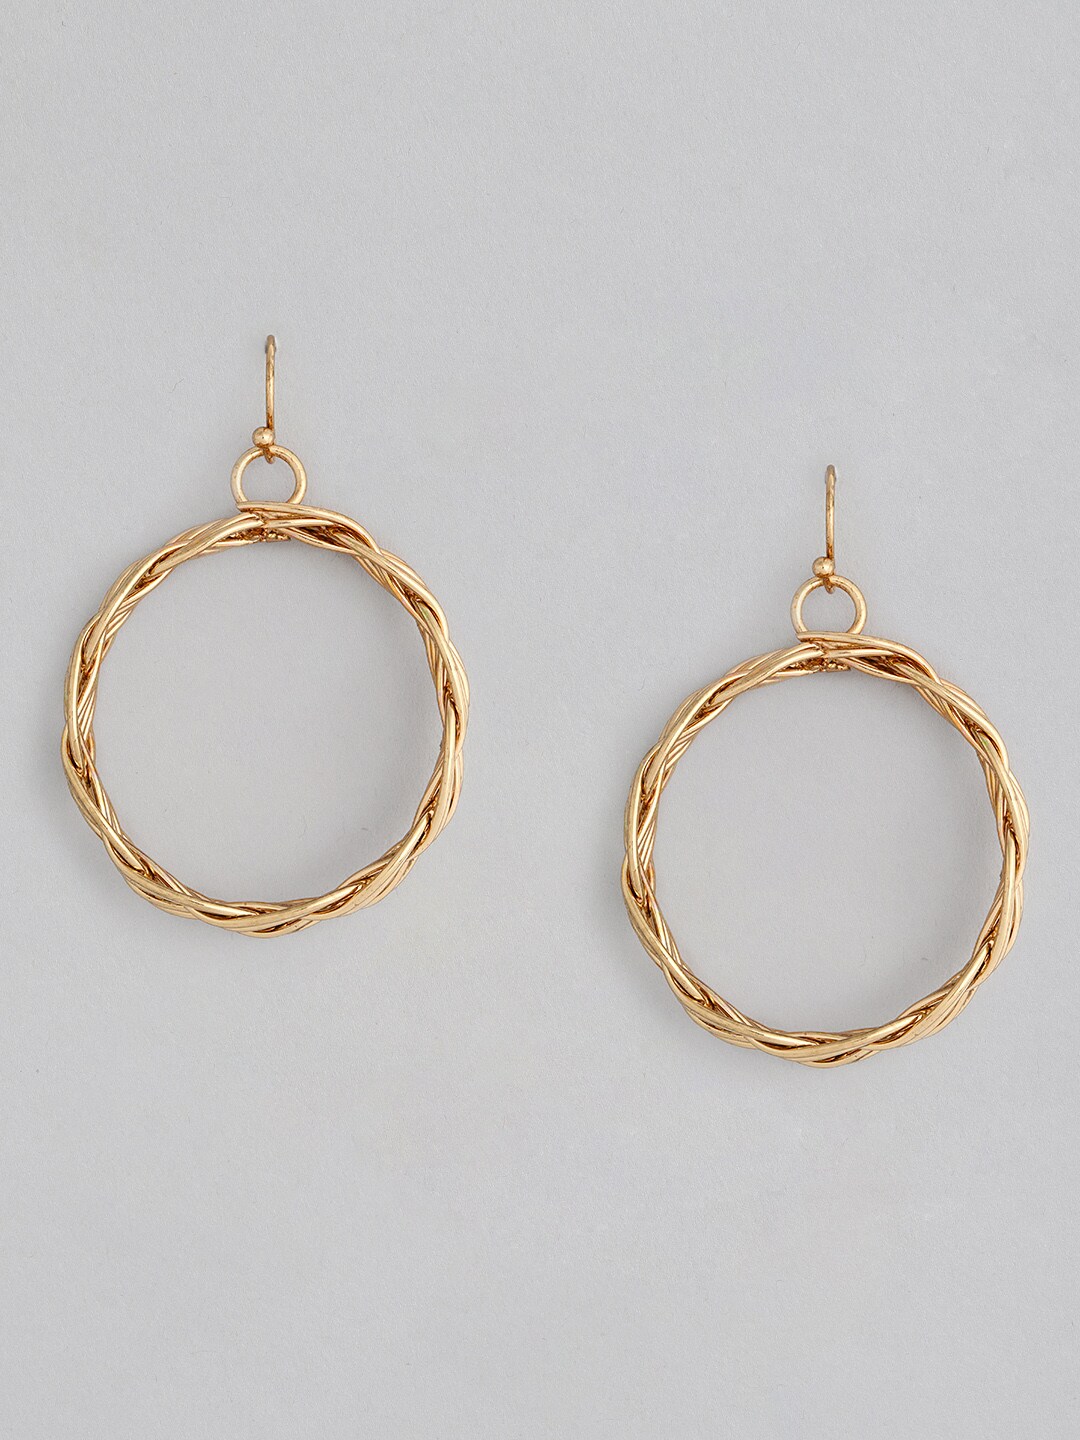 DressBerry Gold-Toned Twined Circular Drop Earrings Price in India